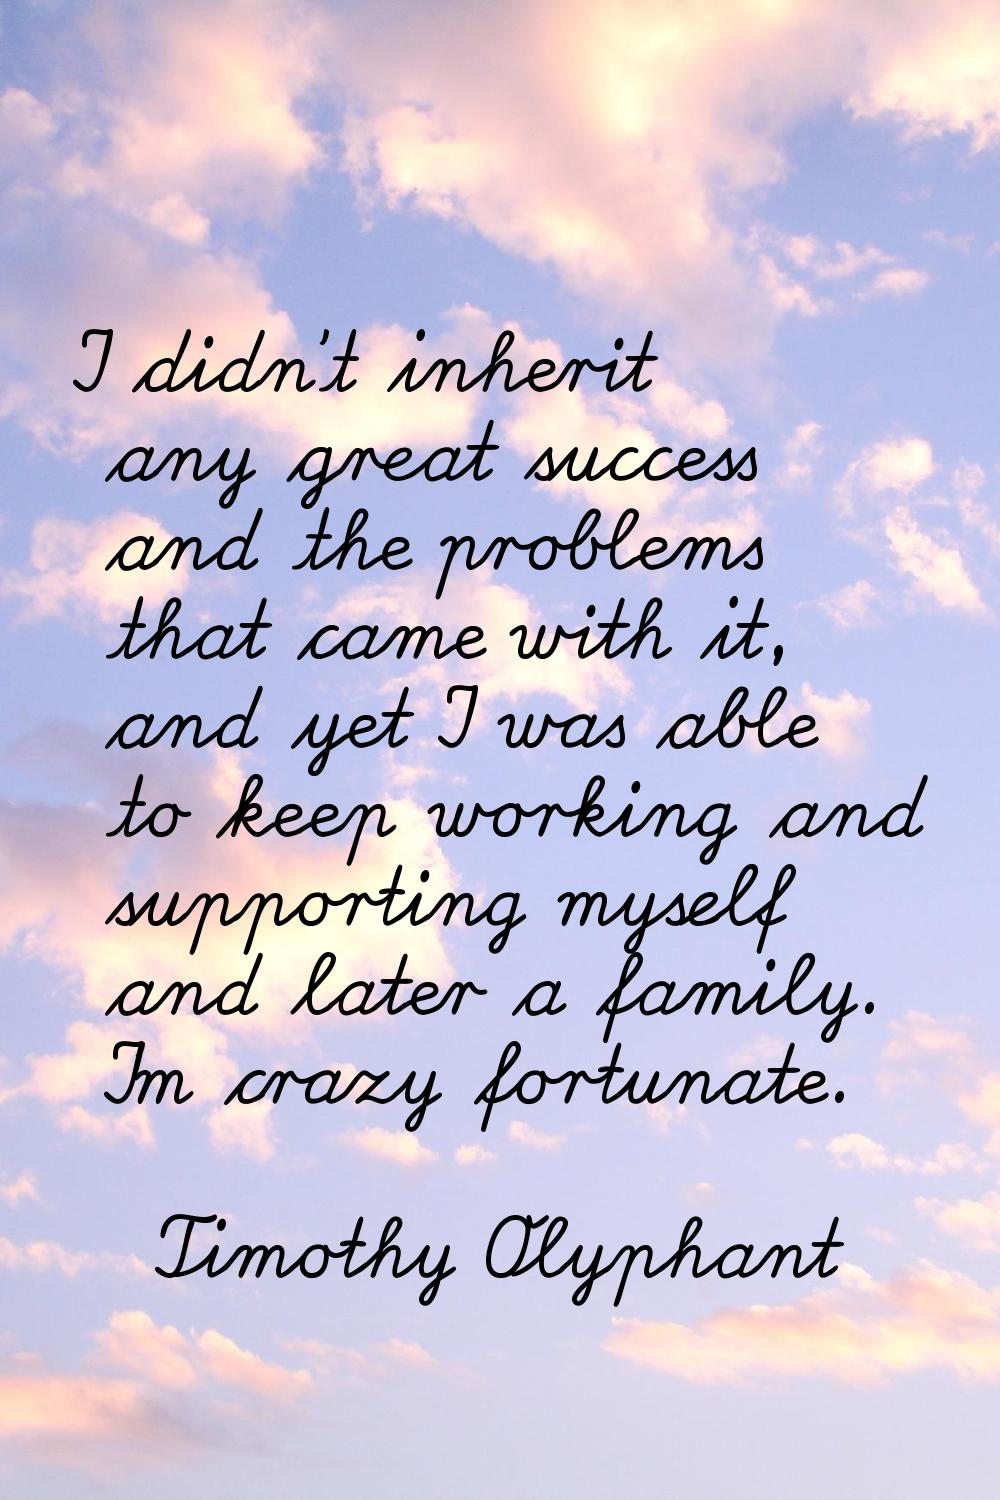 I didn't inherit any great success and the problems that came with it, and yet I was able to keep w